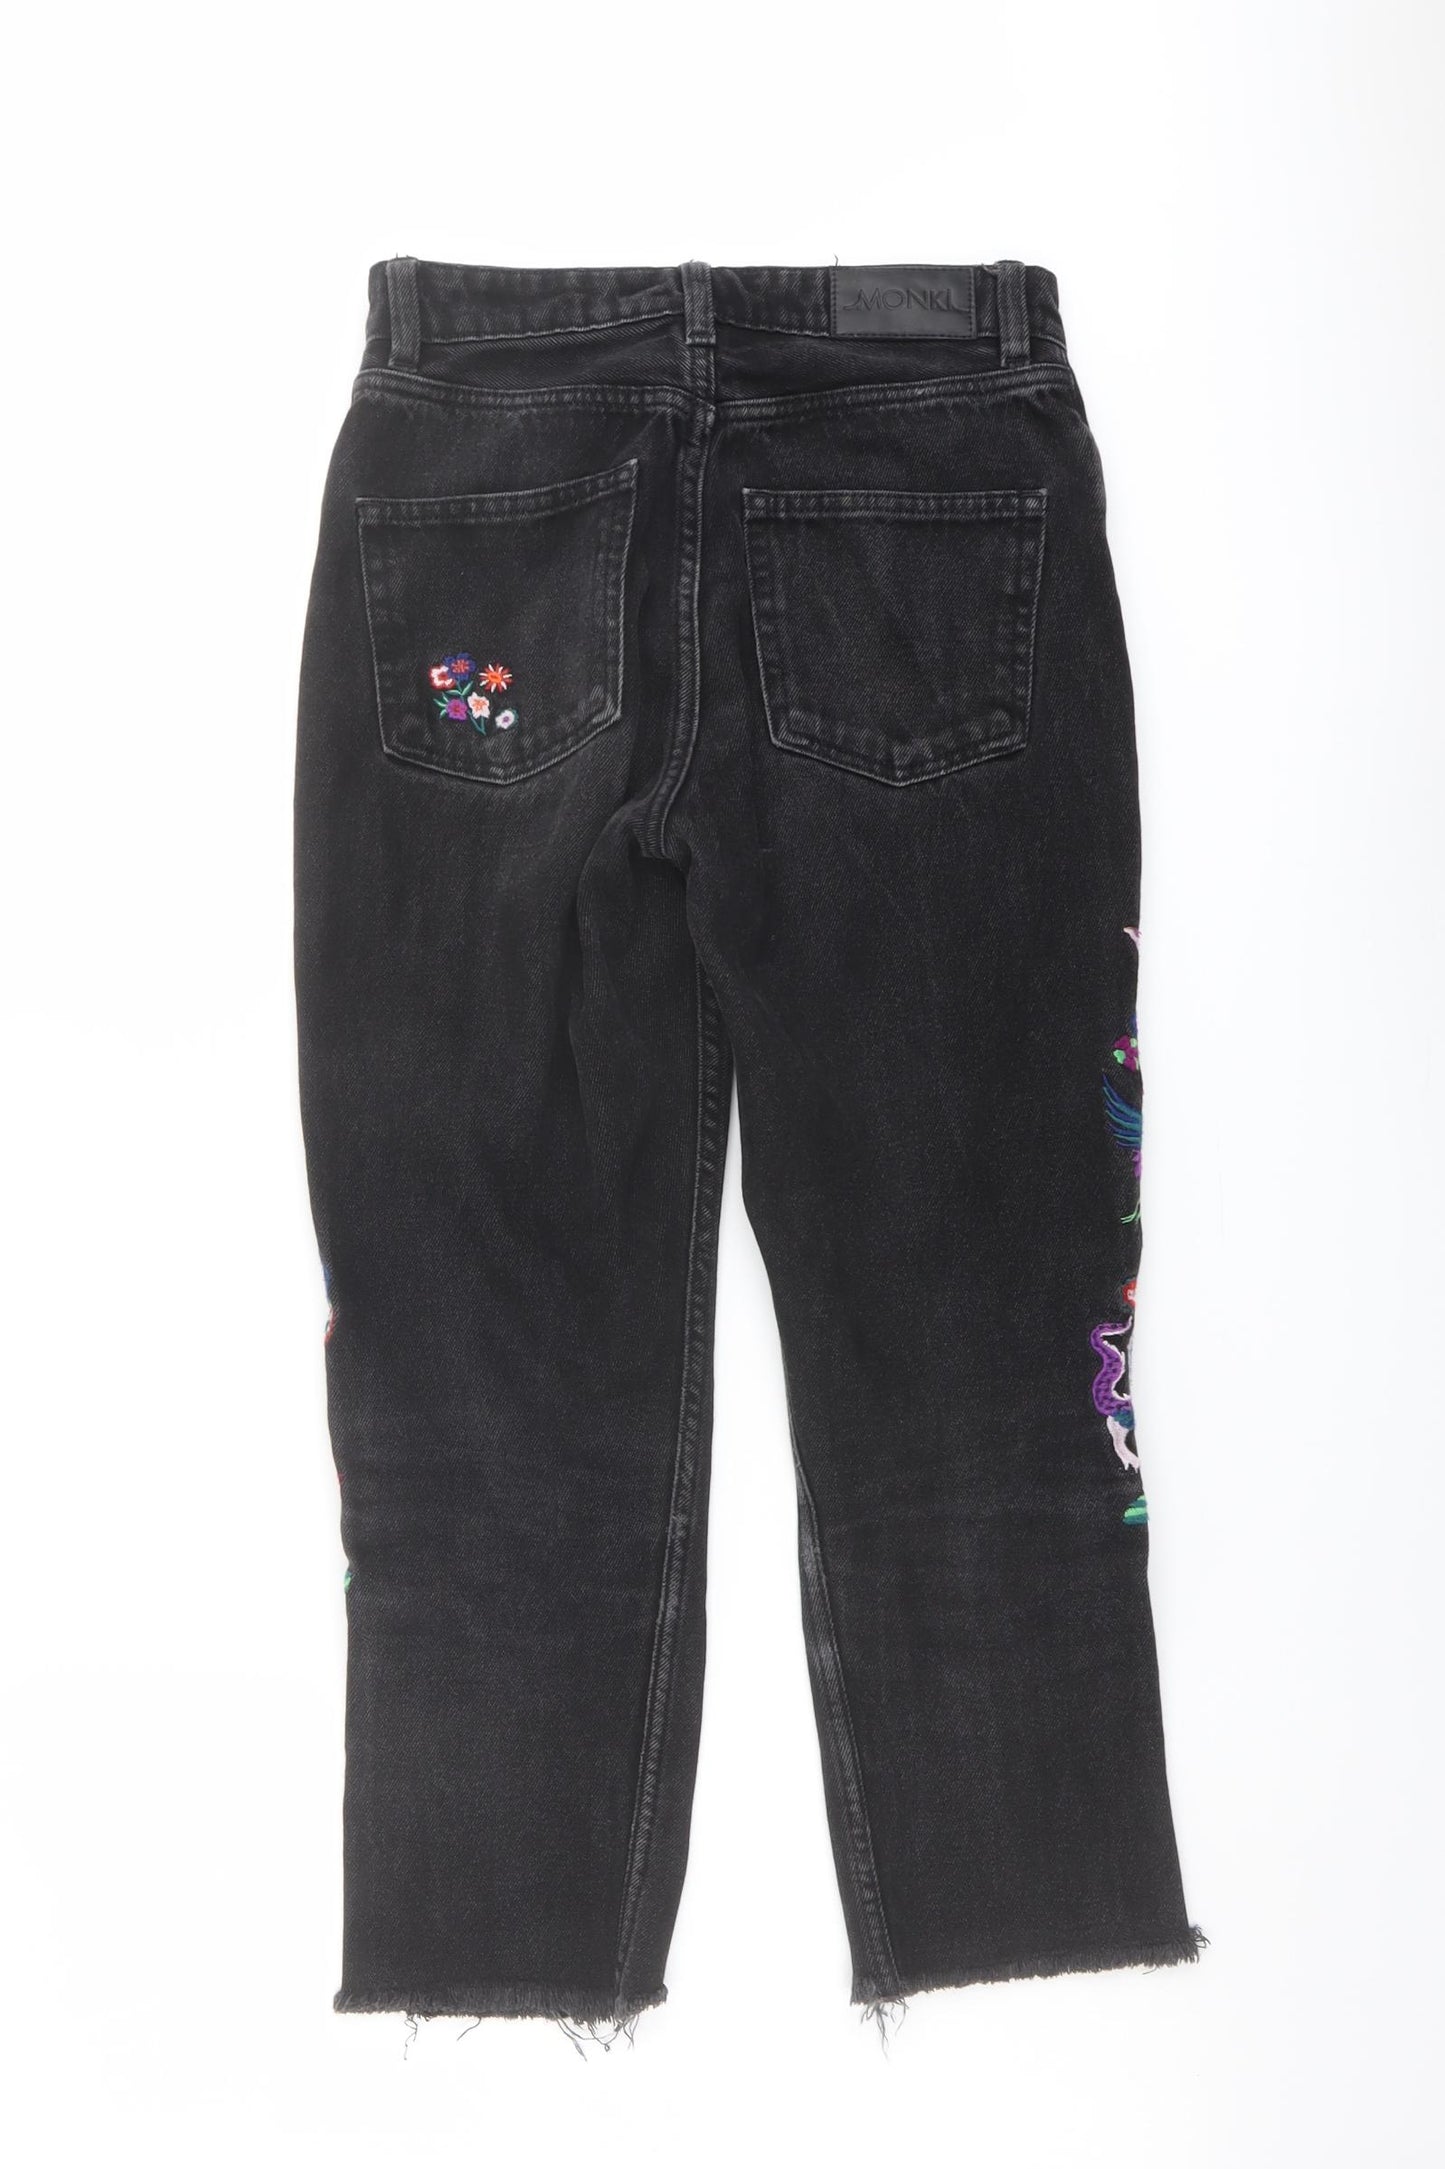 Monki Womens Black Cotton Straight Jeans Size 25 in L22 in Regular Button